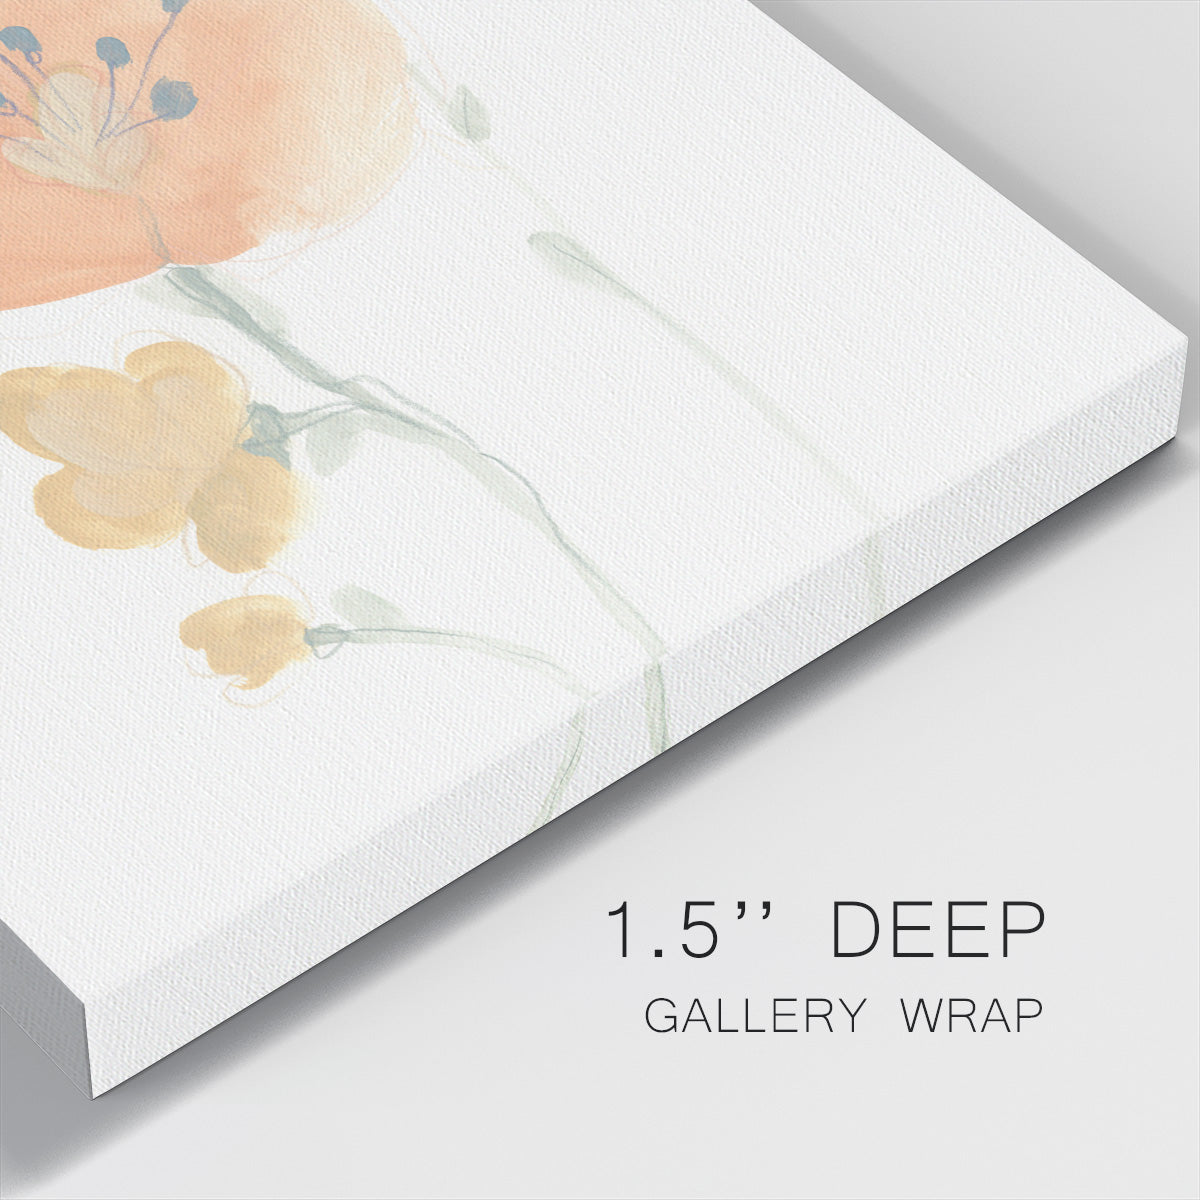 Petite Petals VI-Premium Gallery Wrapped Canvas - Ready to Hang